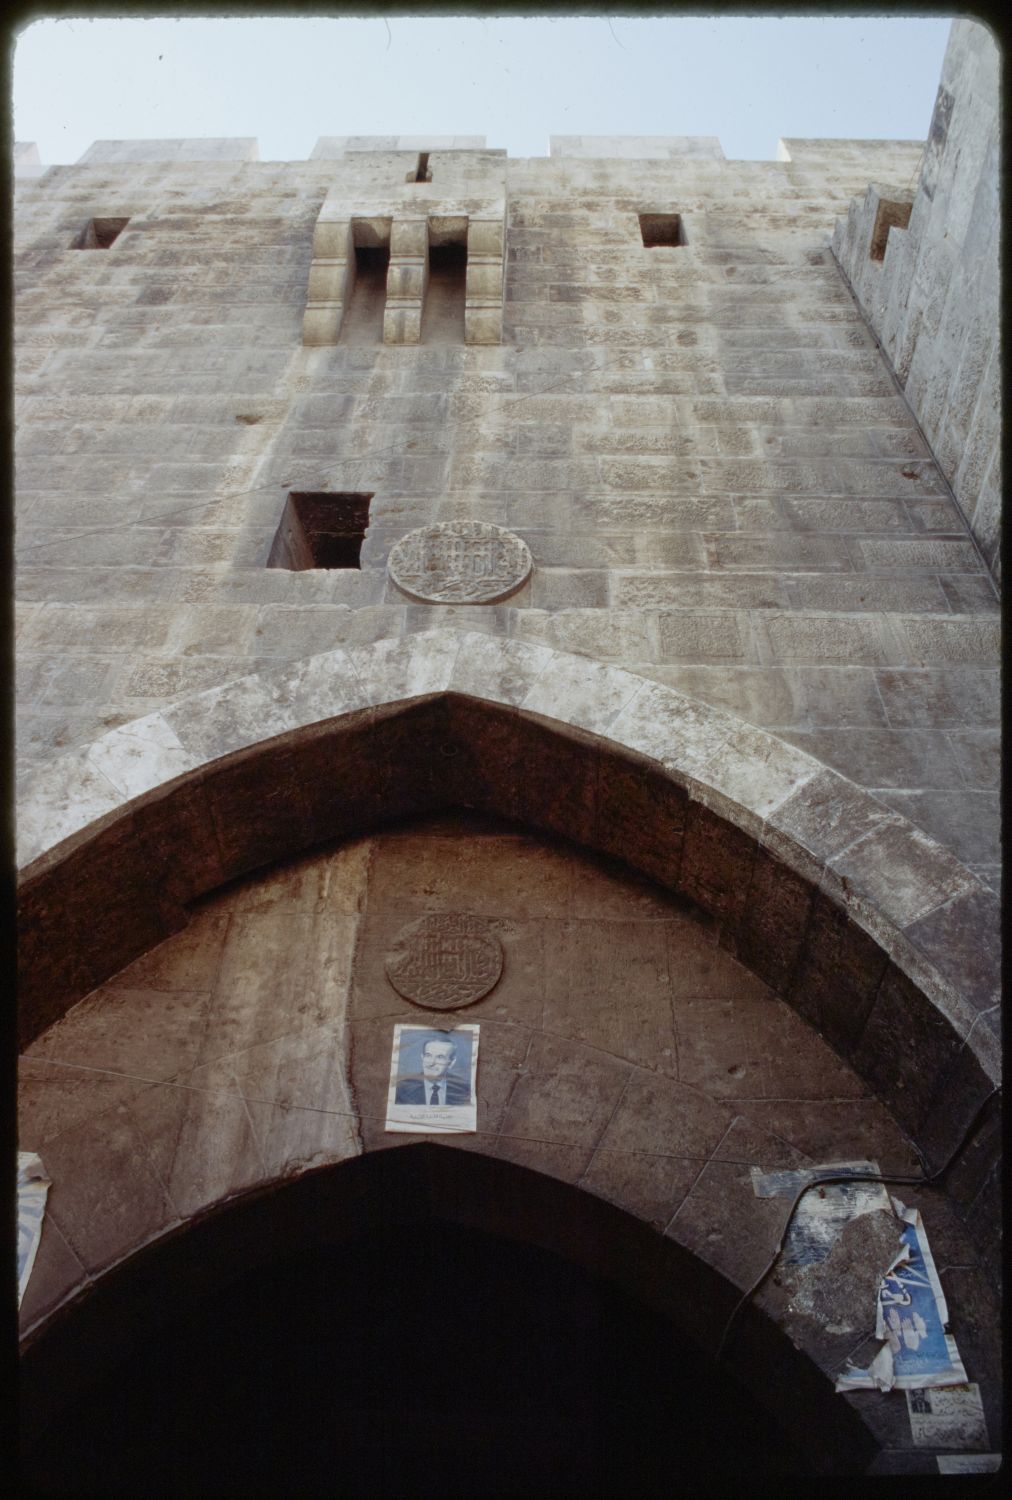 Bab al-Hadid - View of arched entryway and defensive windows above.